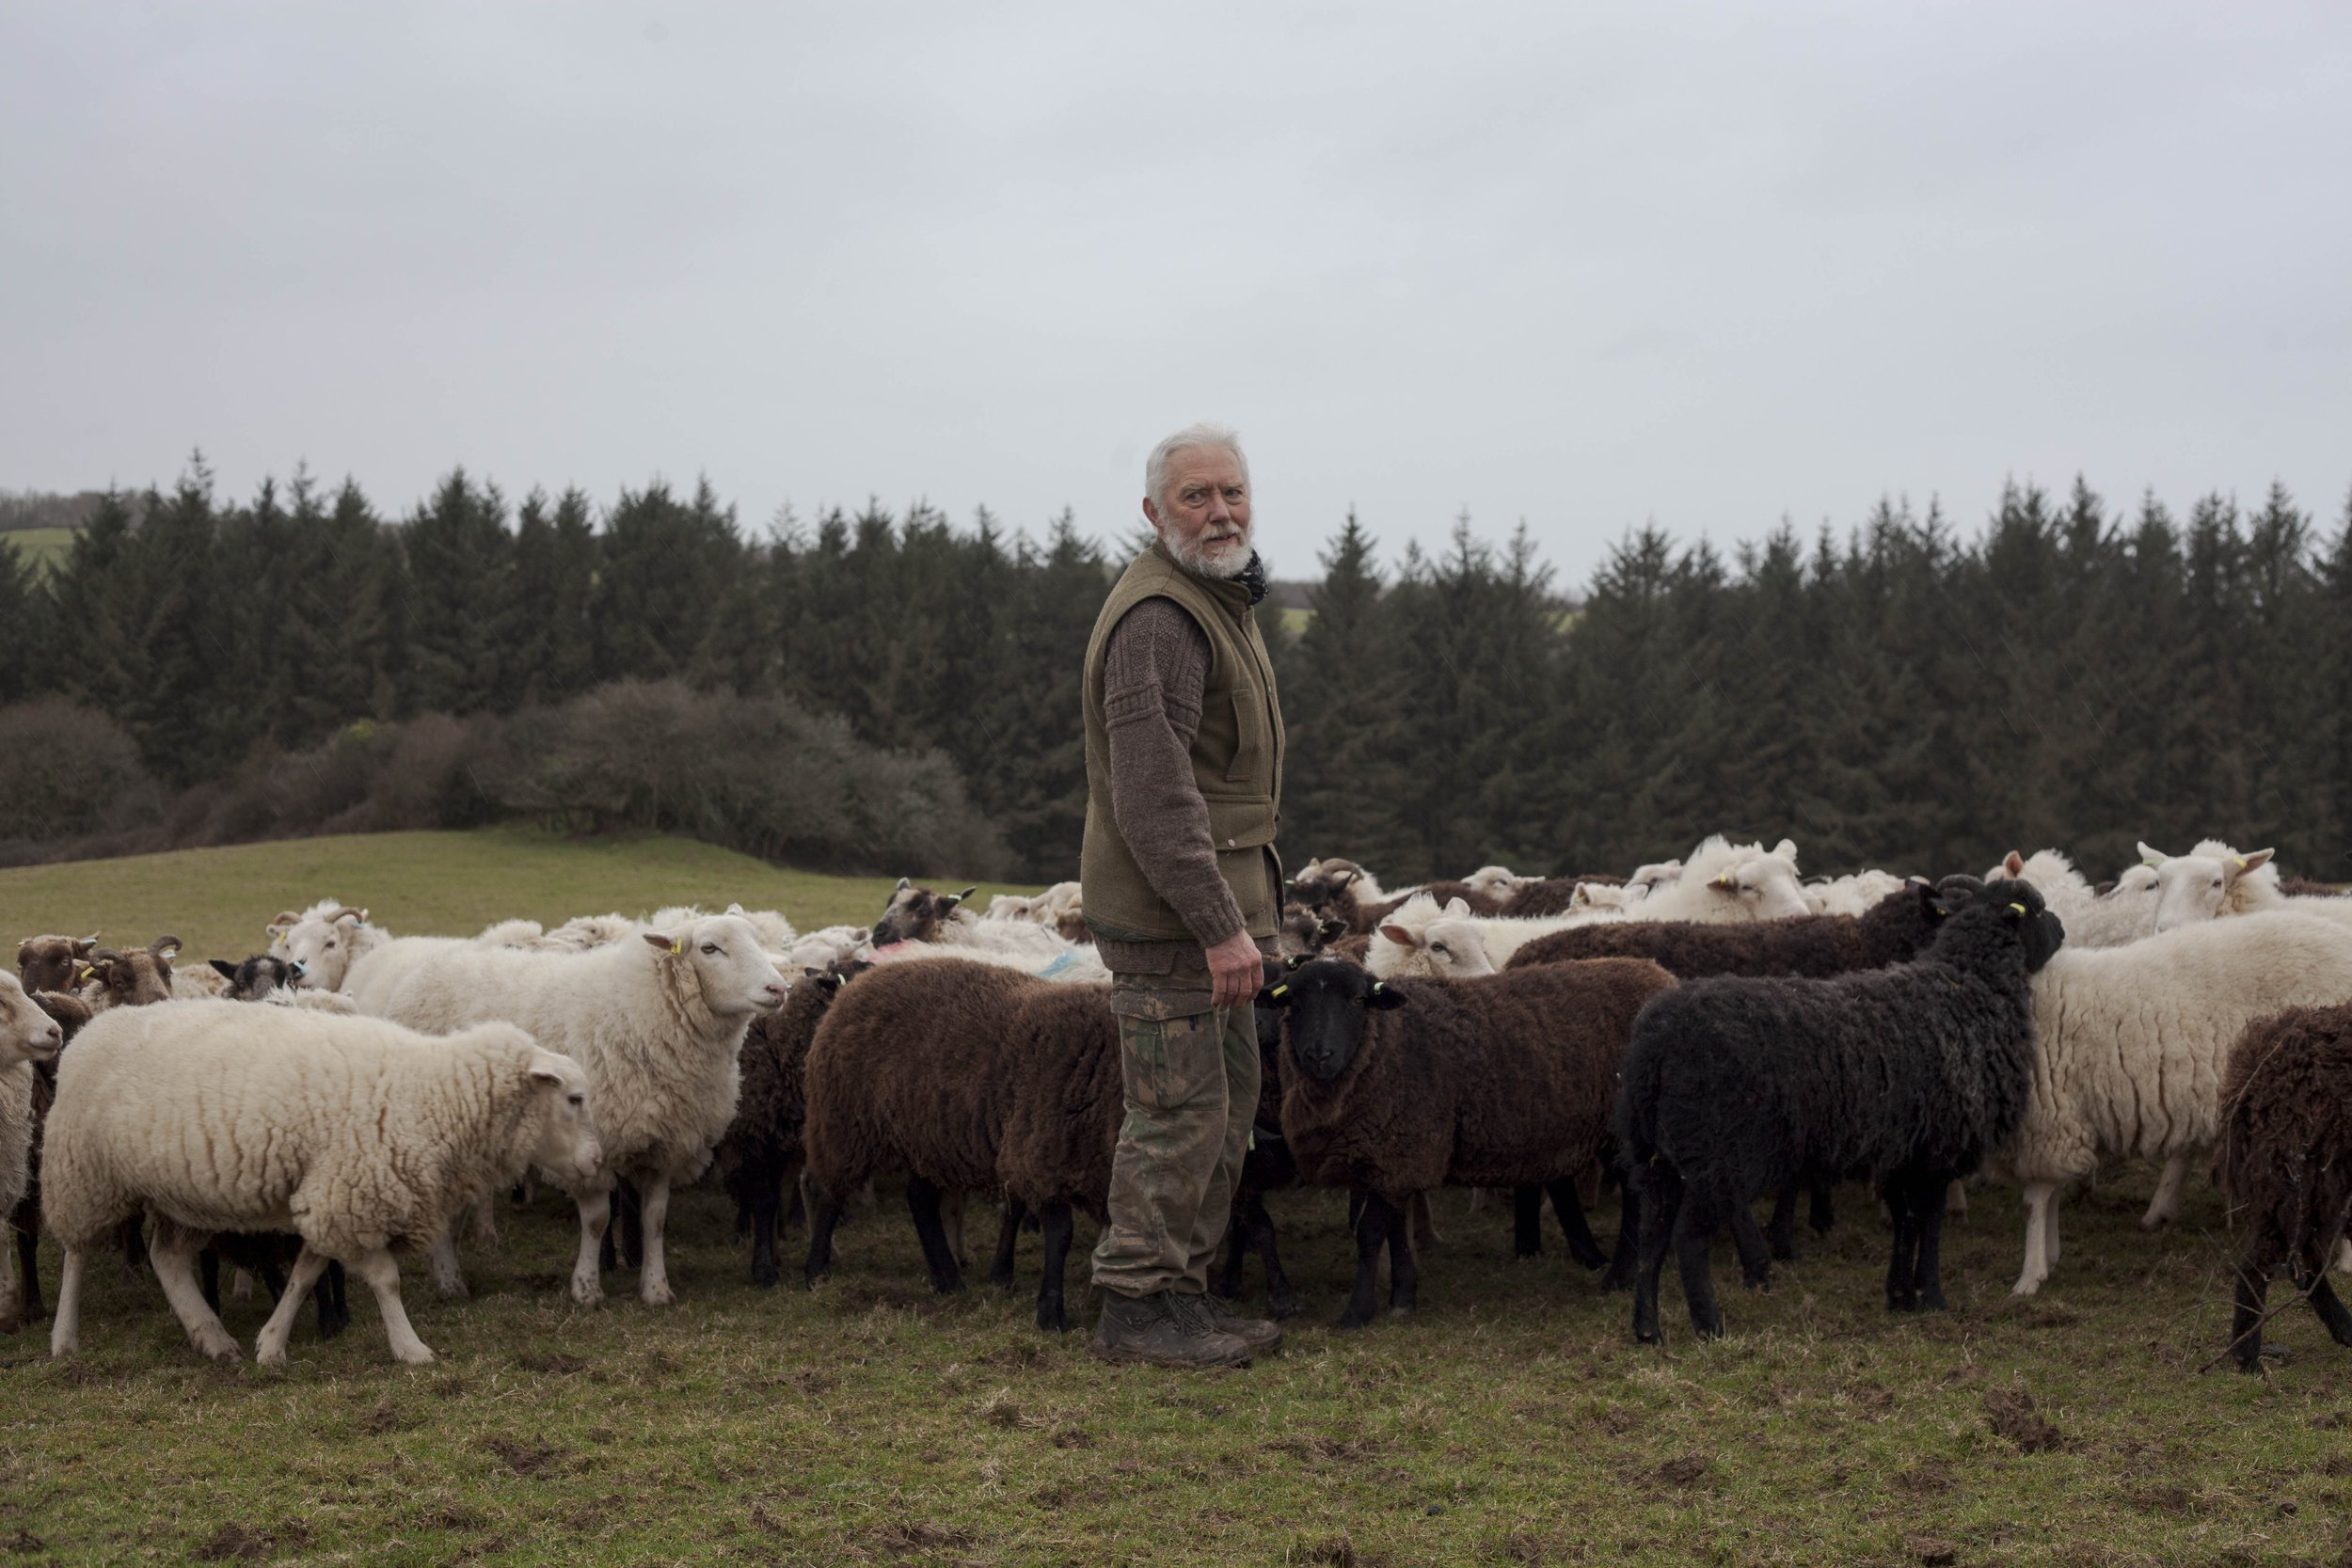 Landscape photograph by Hatty Frances Bell of Lawrence standing in a field surrounded by his flock of sheep at Middle Campscott Farm